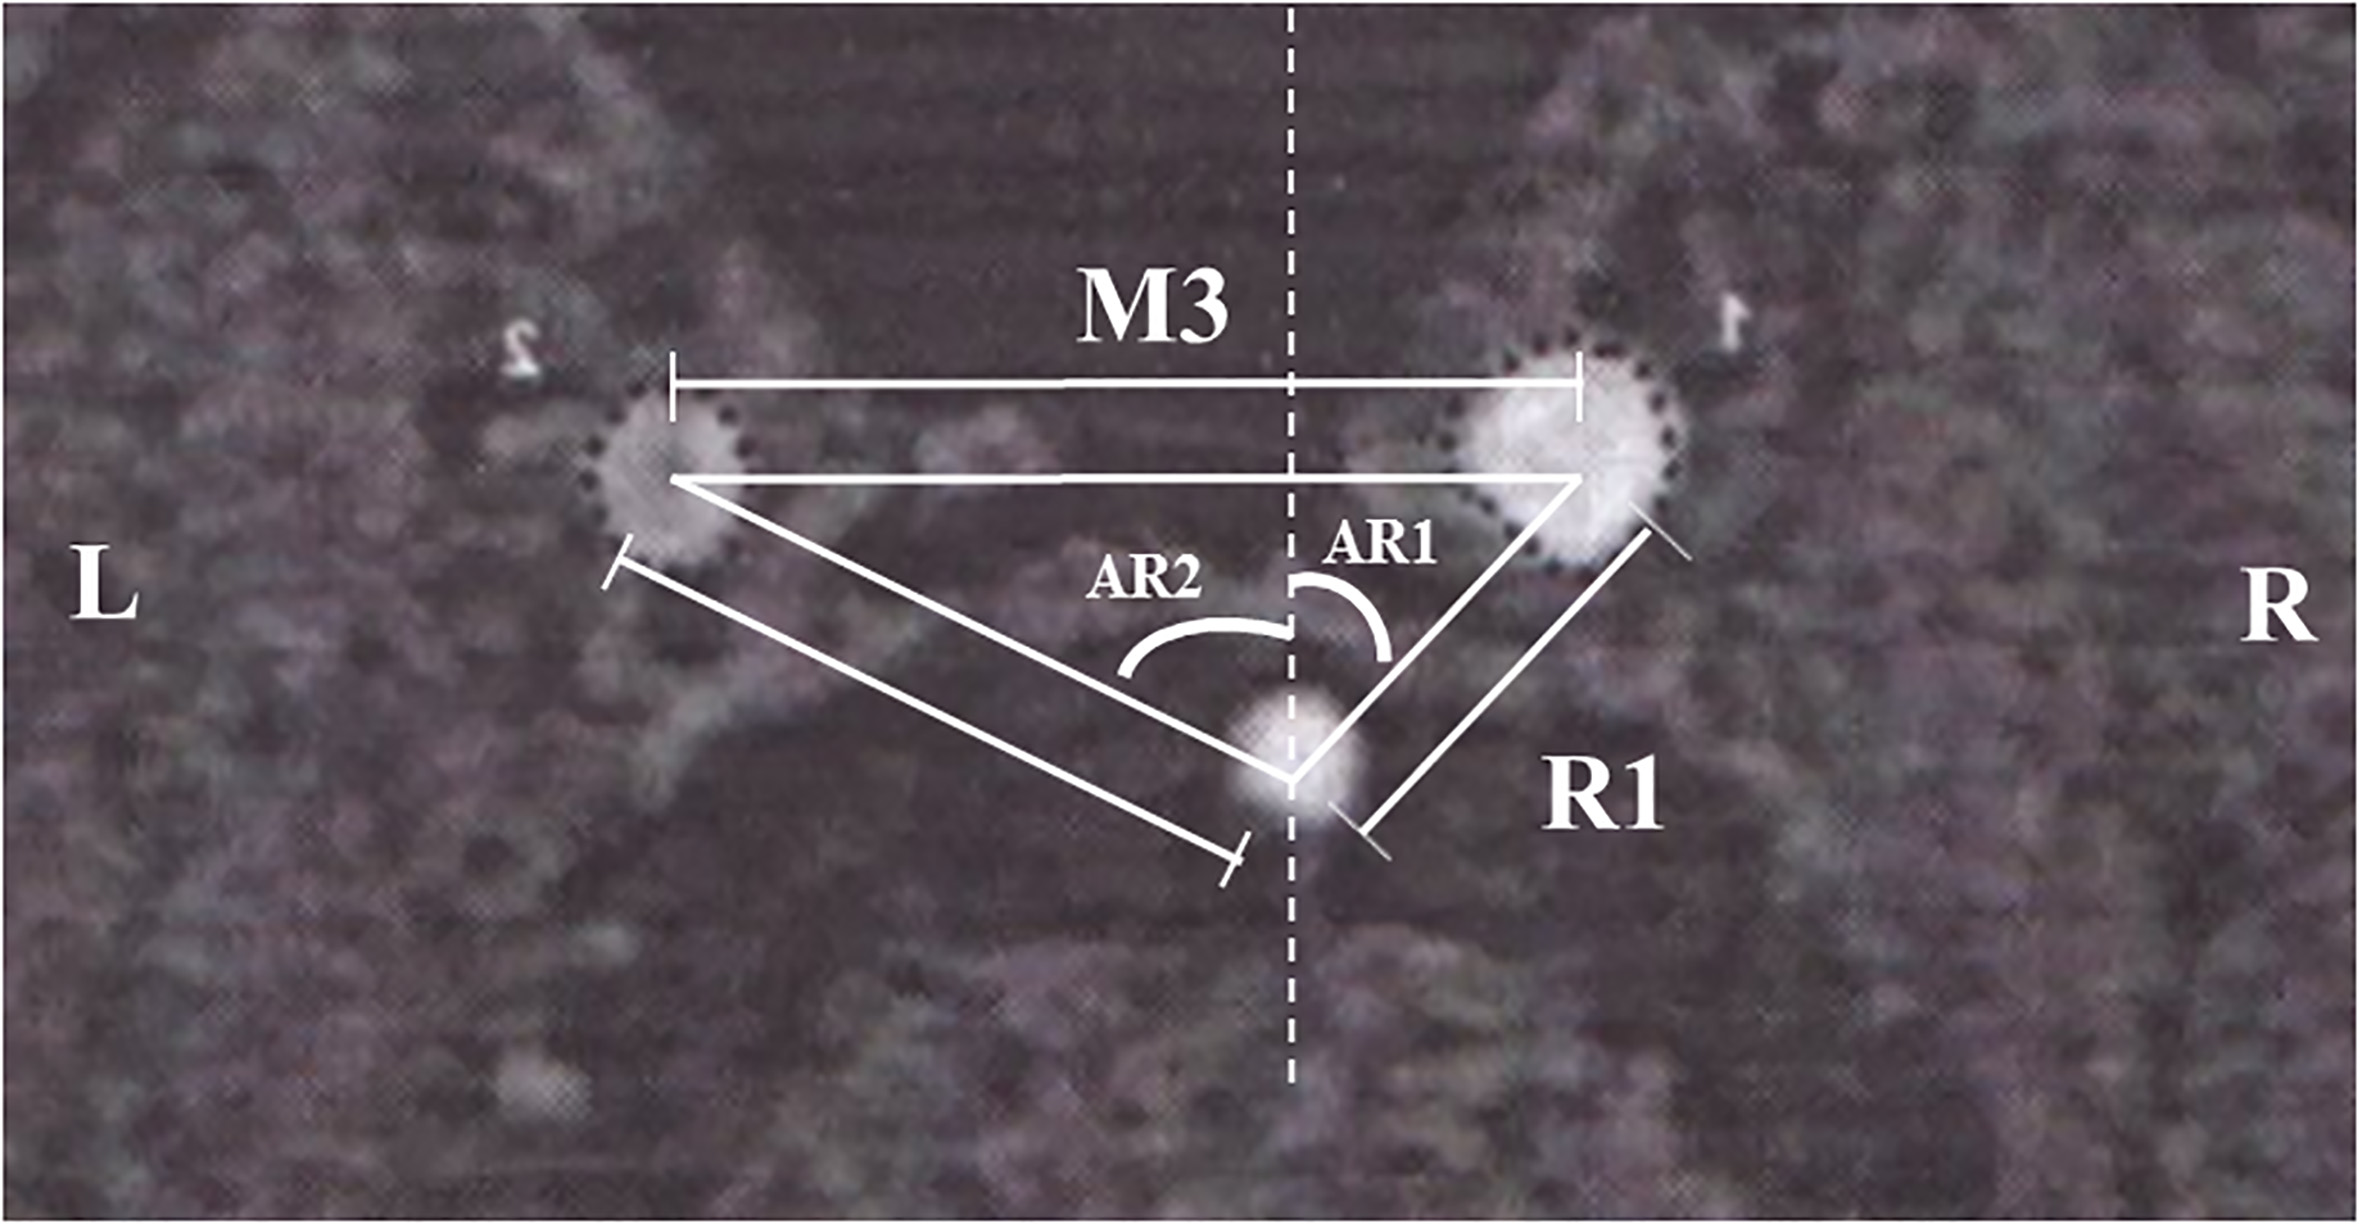 A slice in the transverse plane where the ICA and BA can be clearly distinguished (M3: distance between the right ICA and left ICA [cm], R1: distance between the right ICA and BA [cm], L2: distance between the left ICA and BA [cm], AR1: angle between the right ICA and BA [degree], AR2: angle between the left ICA and BA [degree]).